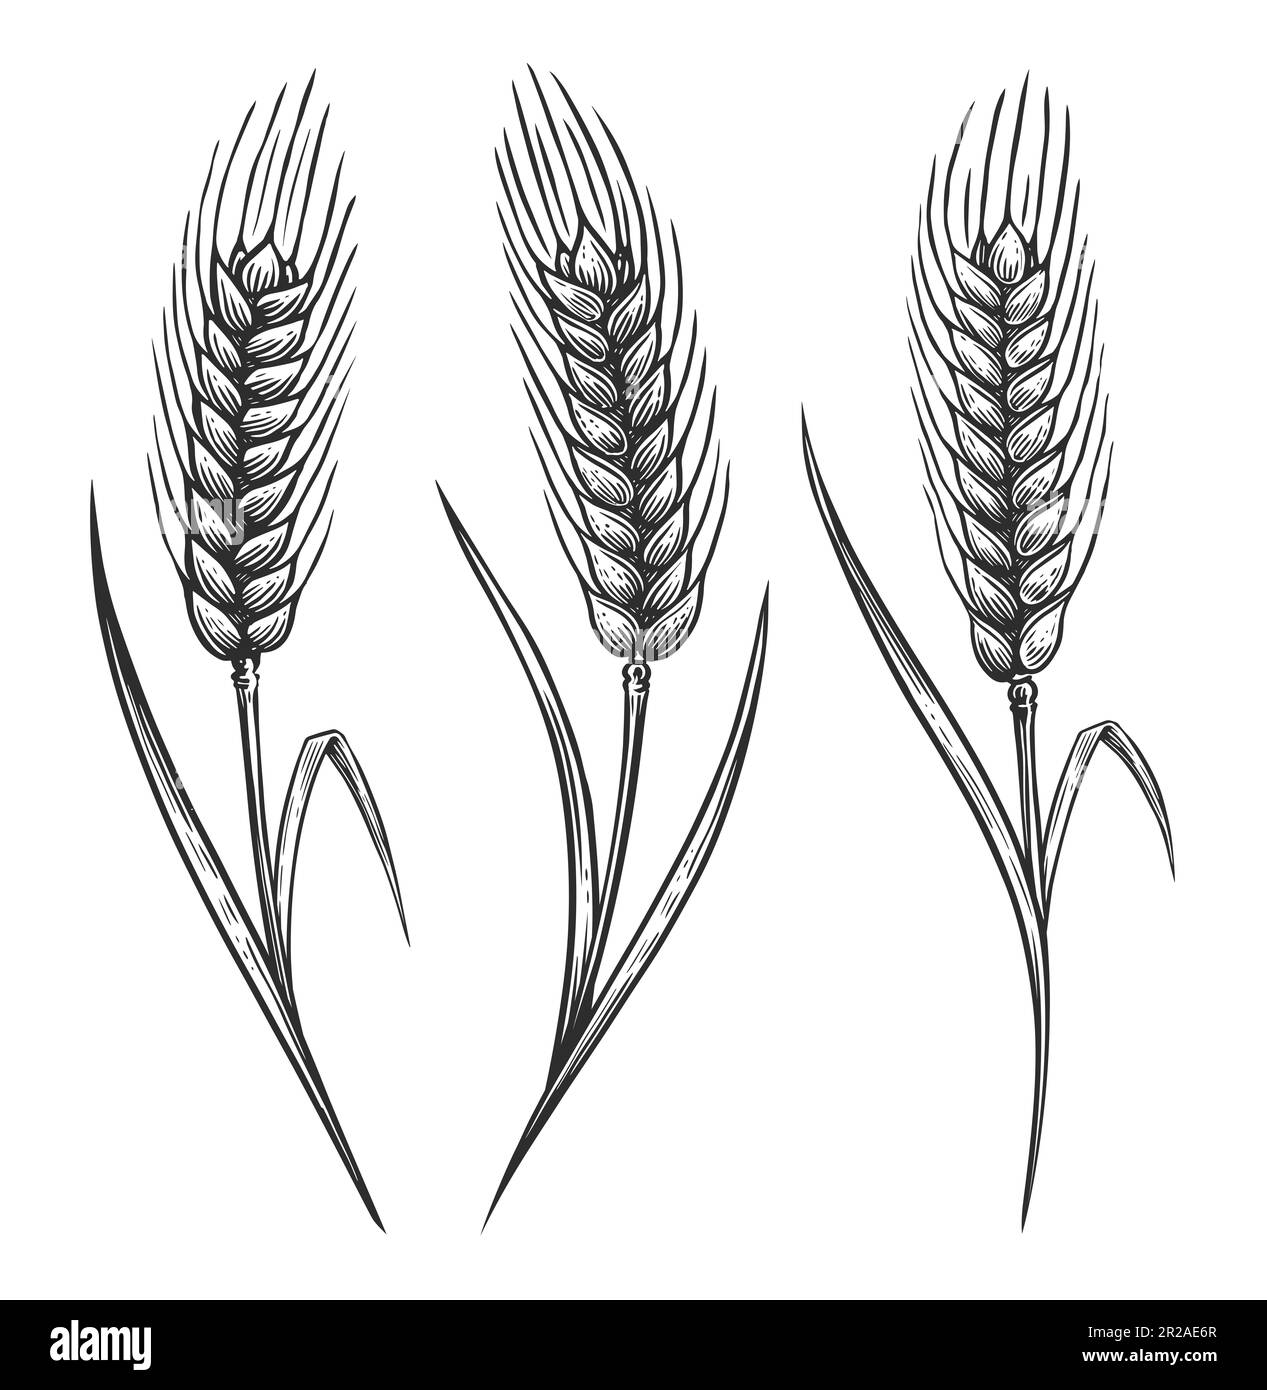 Ears of wheat spikelets with grains. Organic vegetarian food packaging design. Sketch illustration Stock Photo